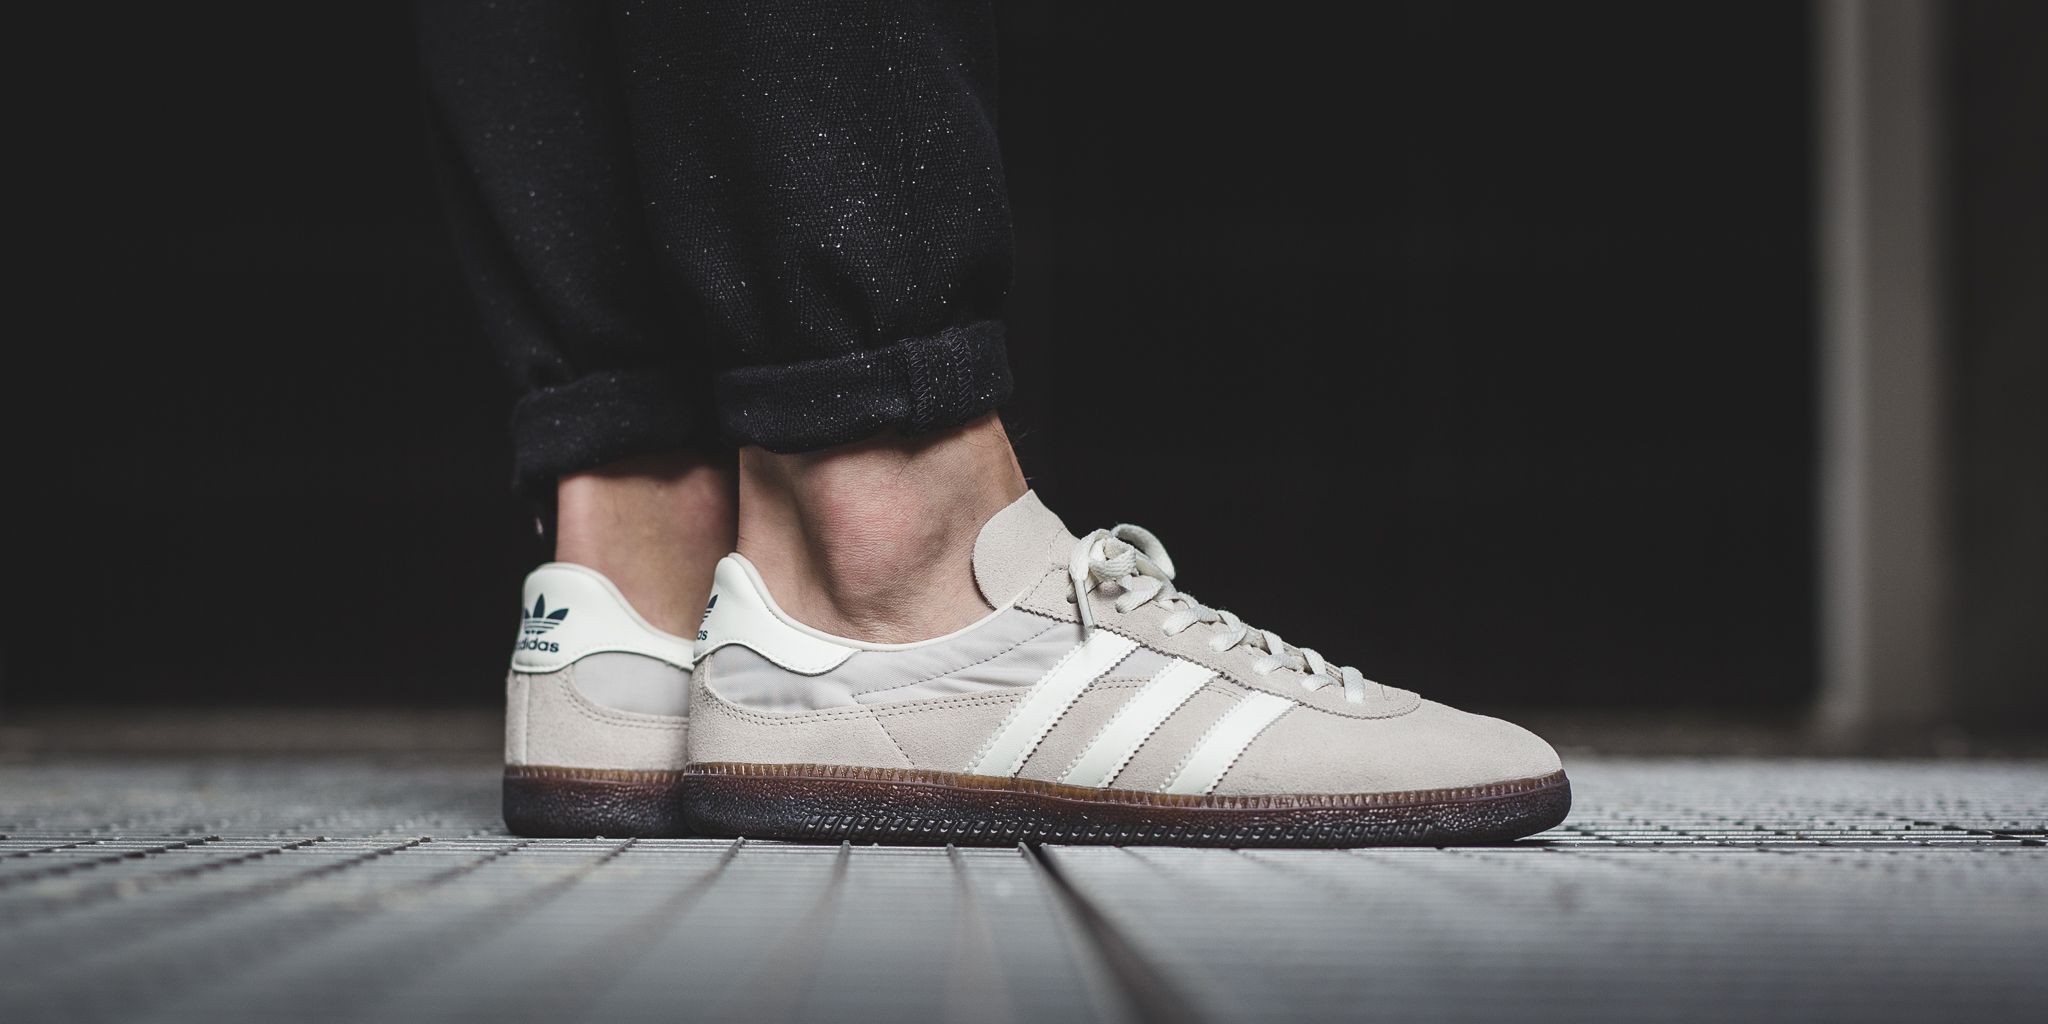 sal puerta En la actualidad Titolo on Twitter: "ONLINE NOW 🍂 Adidas GT Wensley #Spezial - Clear  Brown/Off White/Clear Granite SHOP HERE ➡️ https://t.co/9UXEx13zlx #adidas # Wensley https://t.co/bu0o2Y6ylb" / Twitter